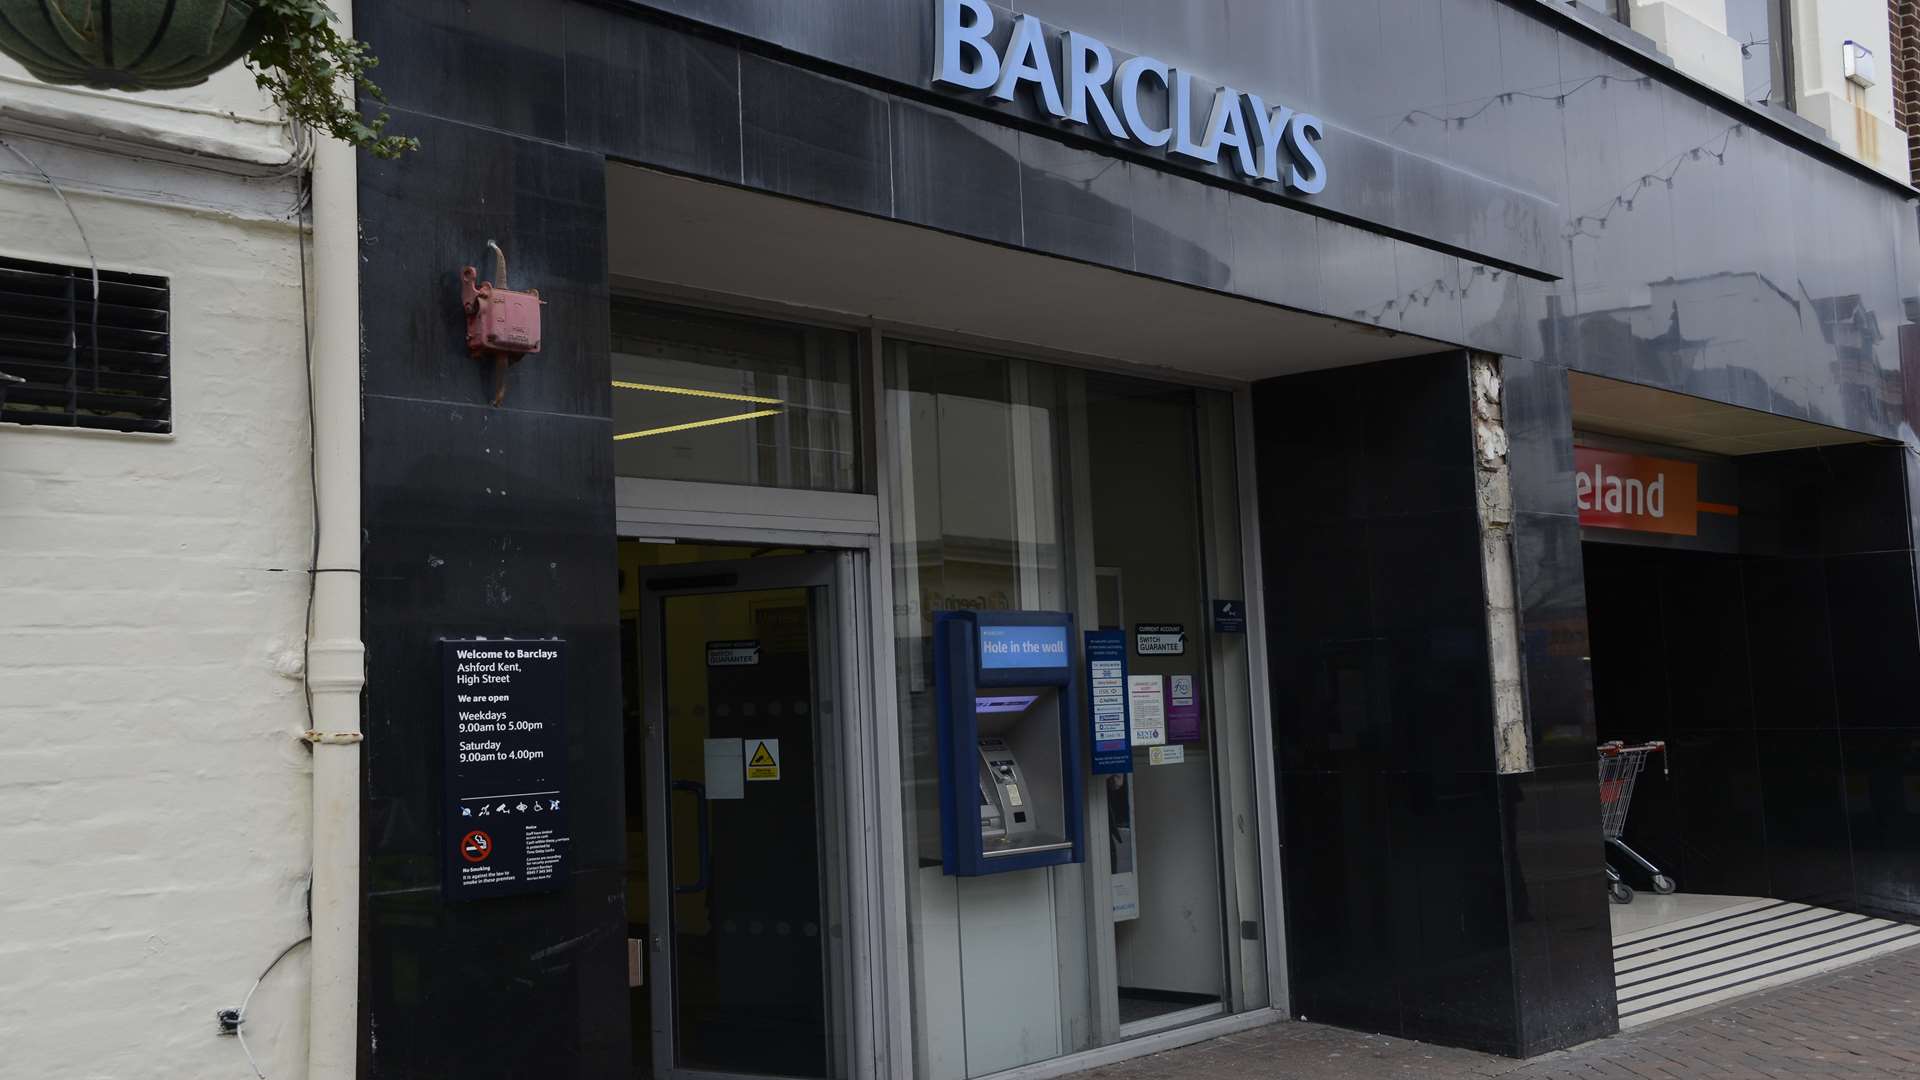 The altercation happened inside Barclays bank